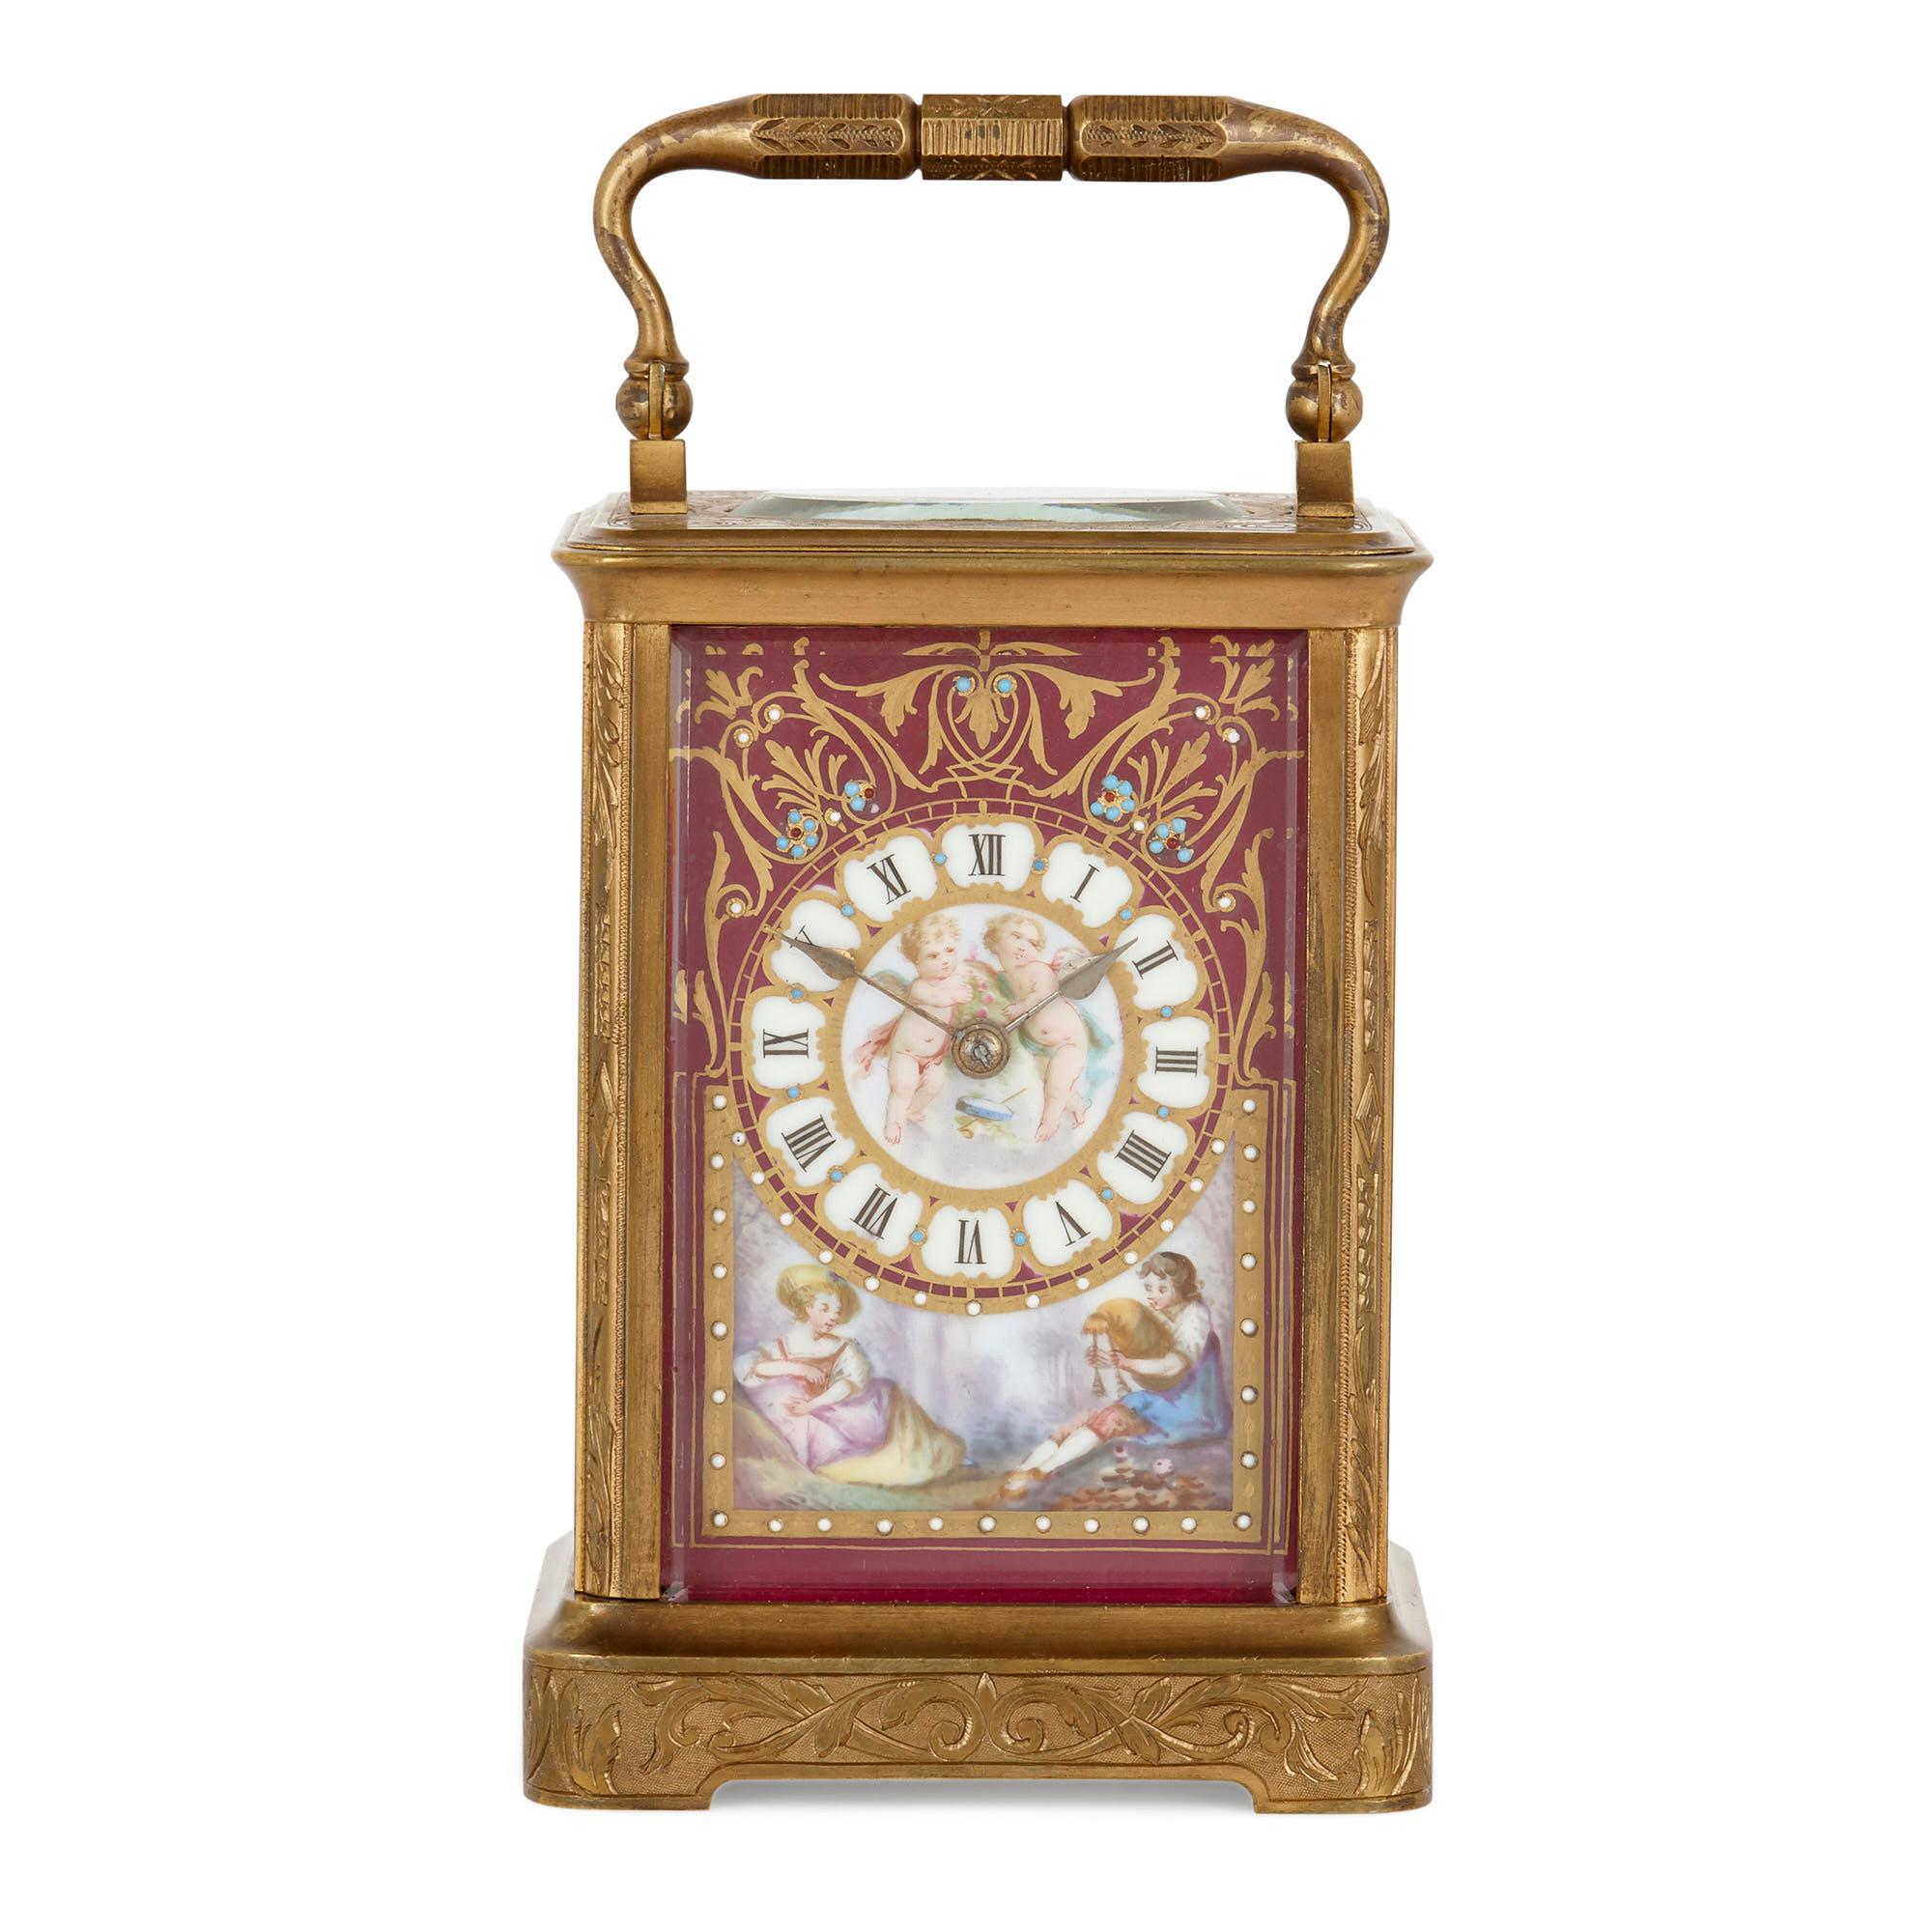 This beautiful clock was crafted in circa 1870 in France. Known as a carriage clock, it was designed for use when travelling. Such clocks were crafted on a small scale with handles, so they could be easily transportable from one place to